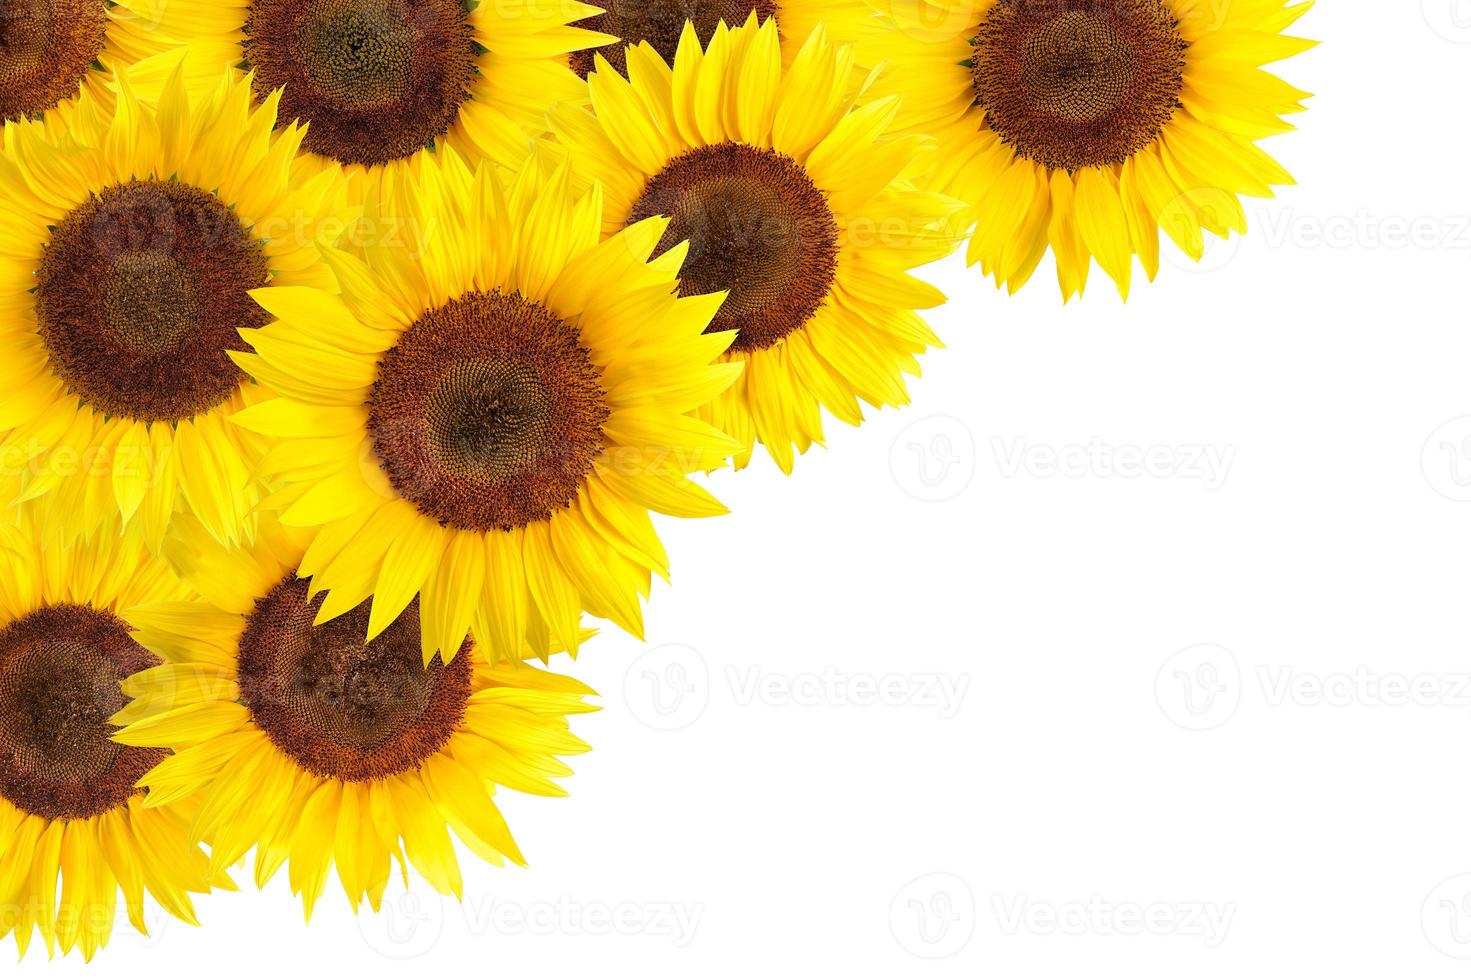 Sunflowers border with white copy space photo